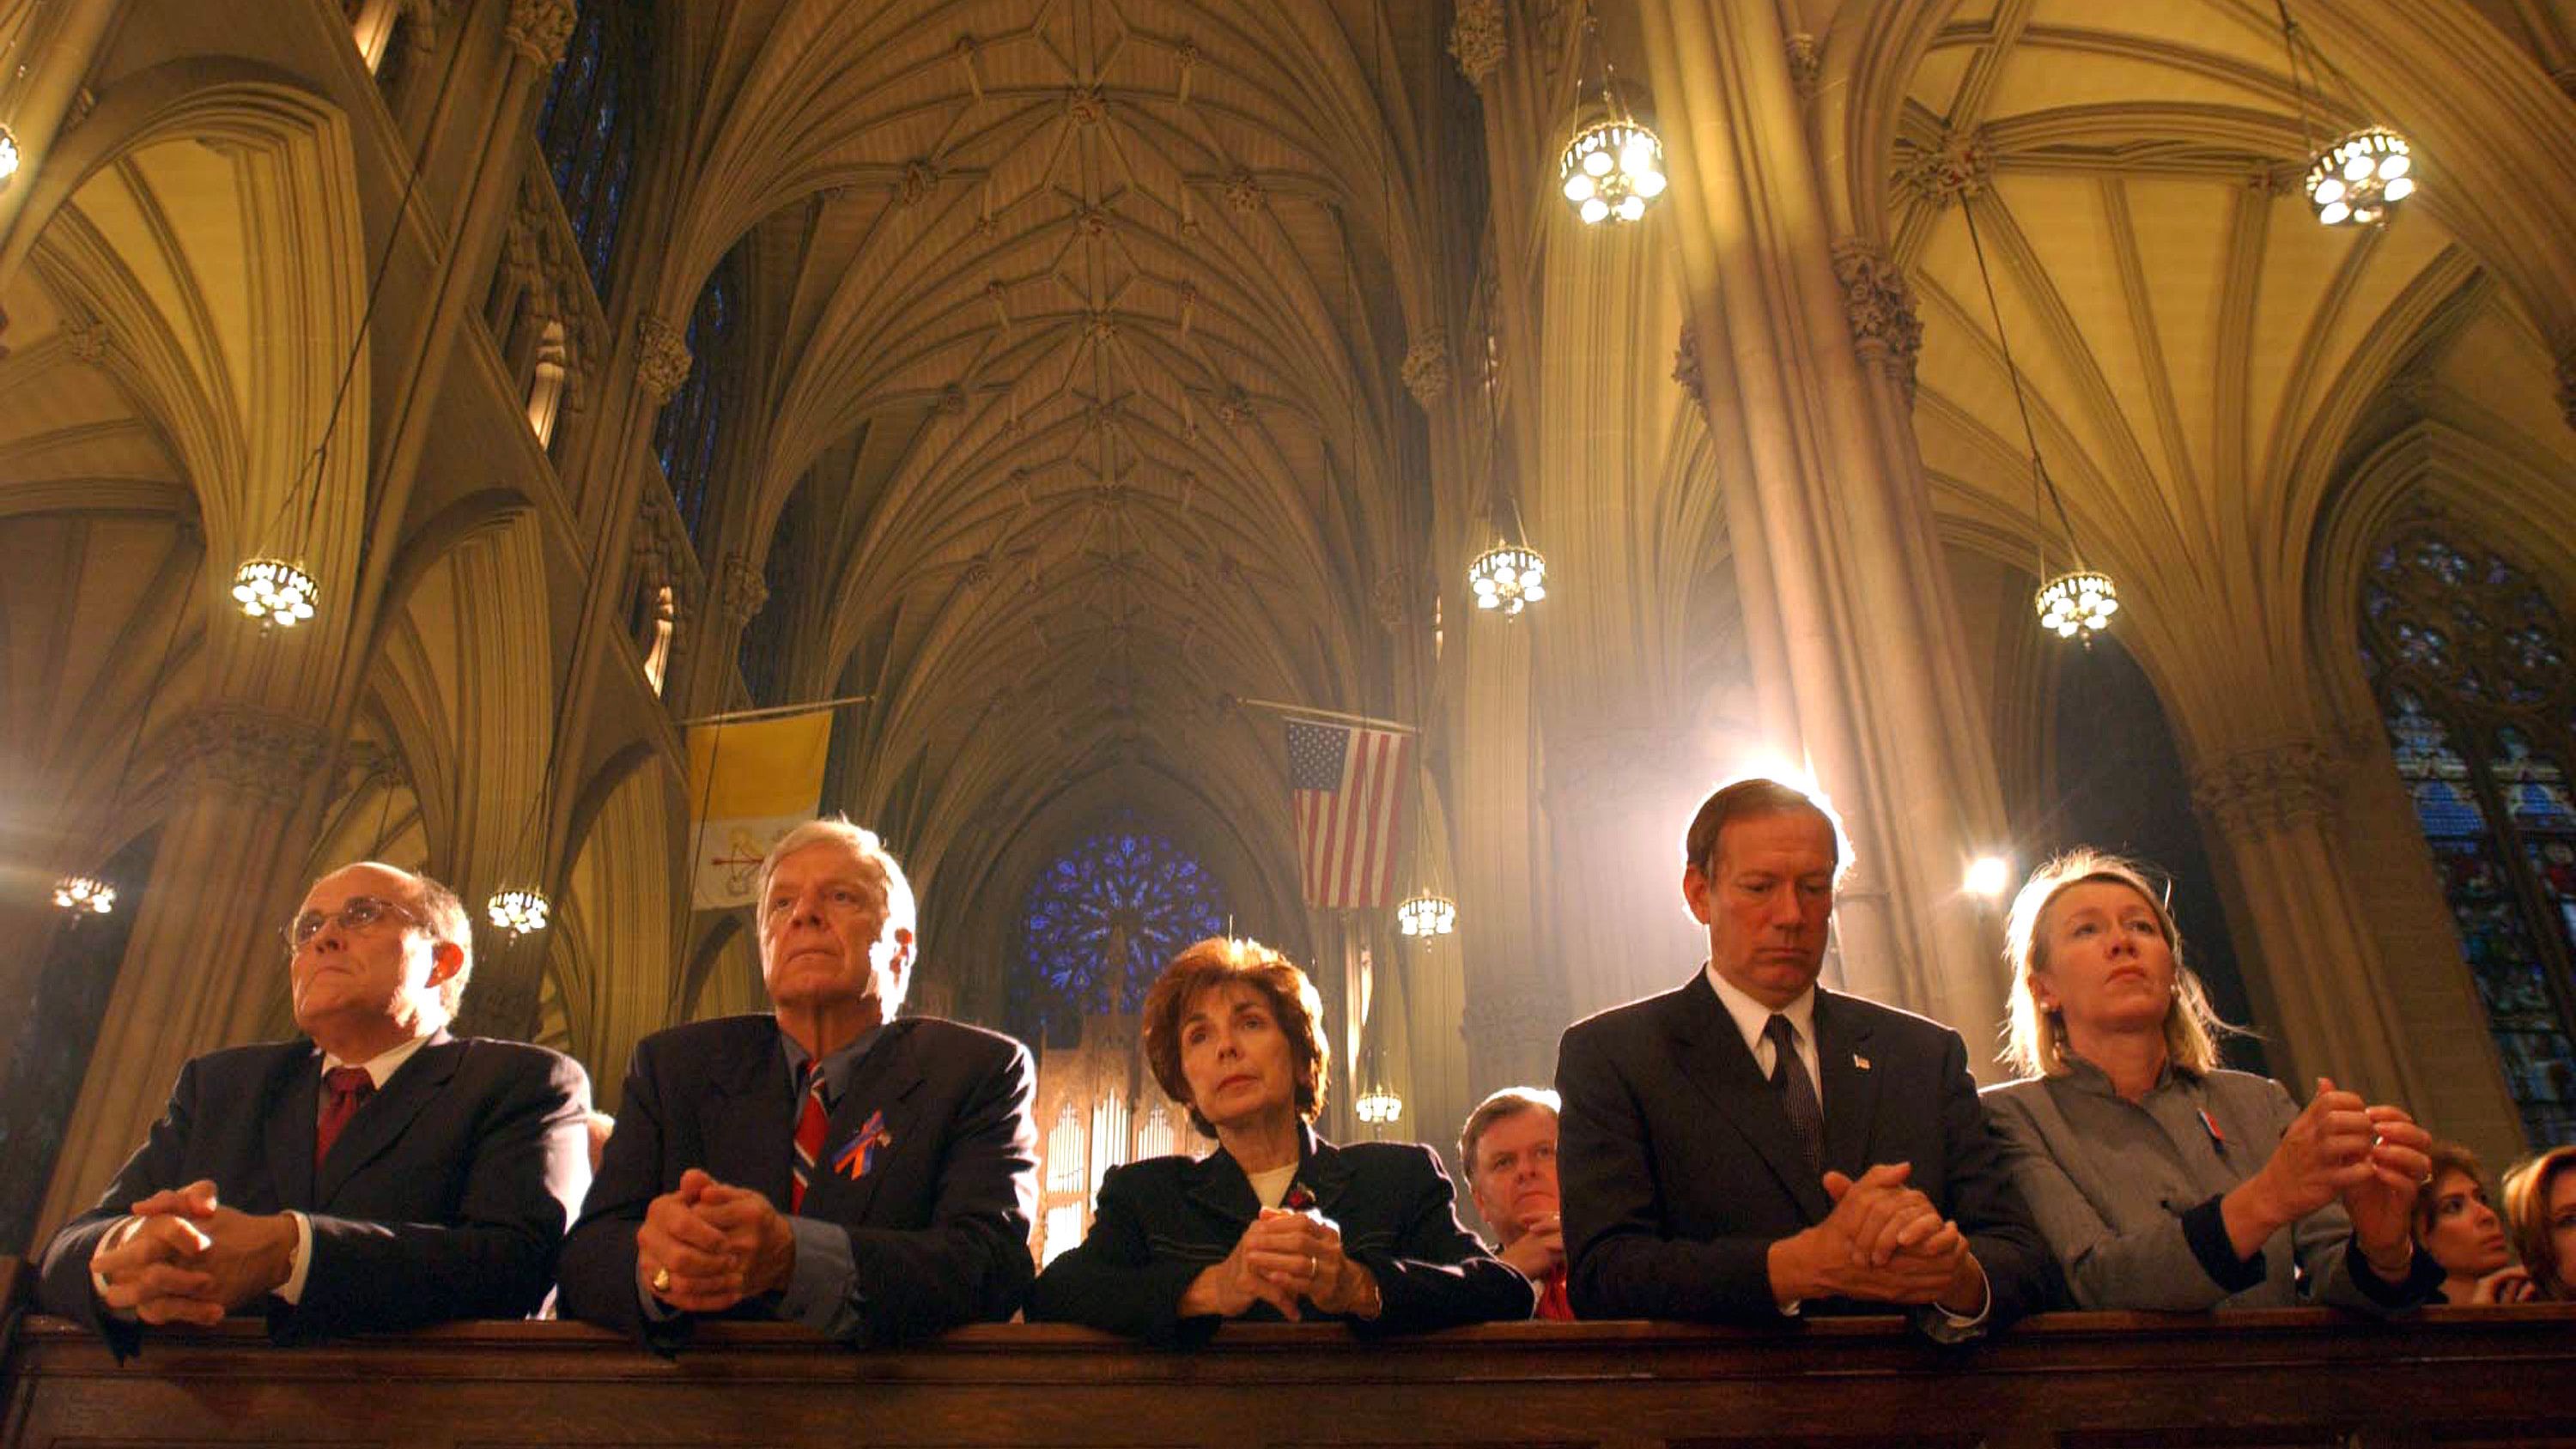 Giuliani, left, prays at St. Patrick's Cathedral a few days after the September 11 attacks. At right is New York Gov. George Pataki and his wife, Libby.